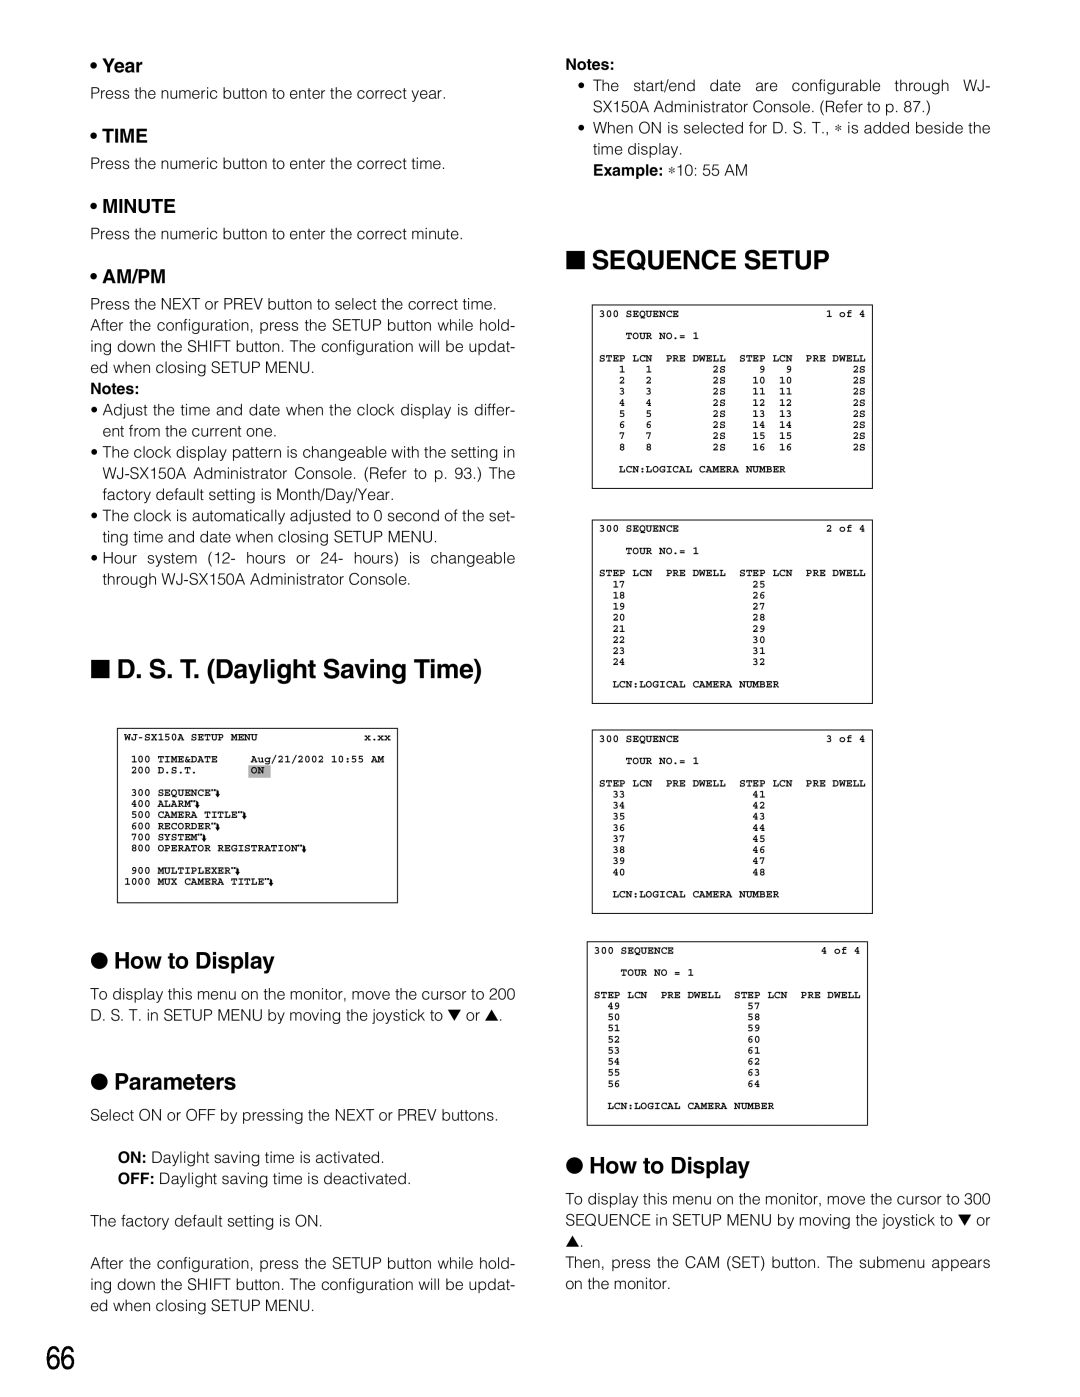 Panasonic WJ-SX150A manual D. S. T. Daylight Saving Time, Sequence Setup, Year, Minute, Am/Pm, How to Display, Parameters 